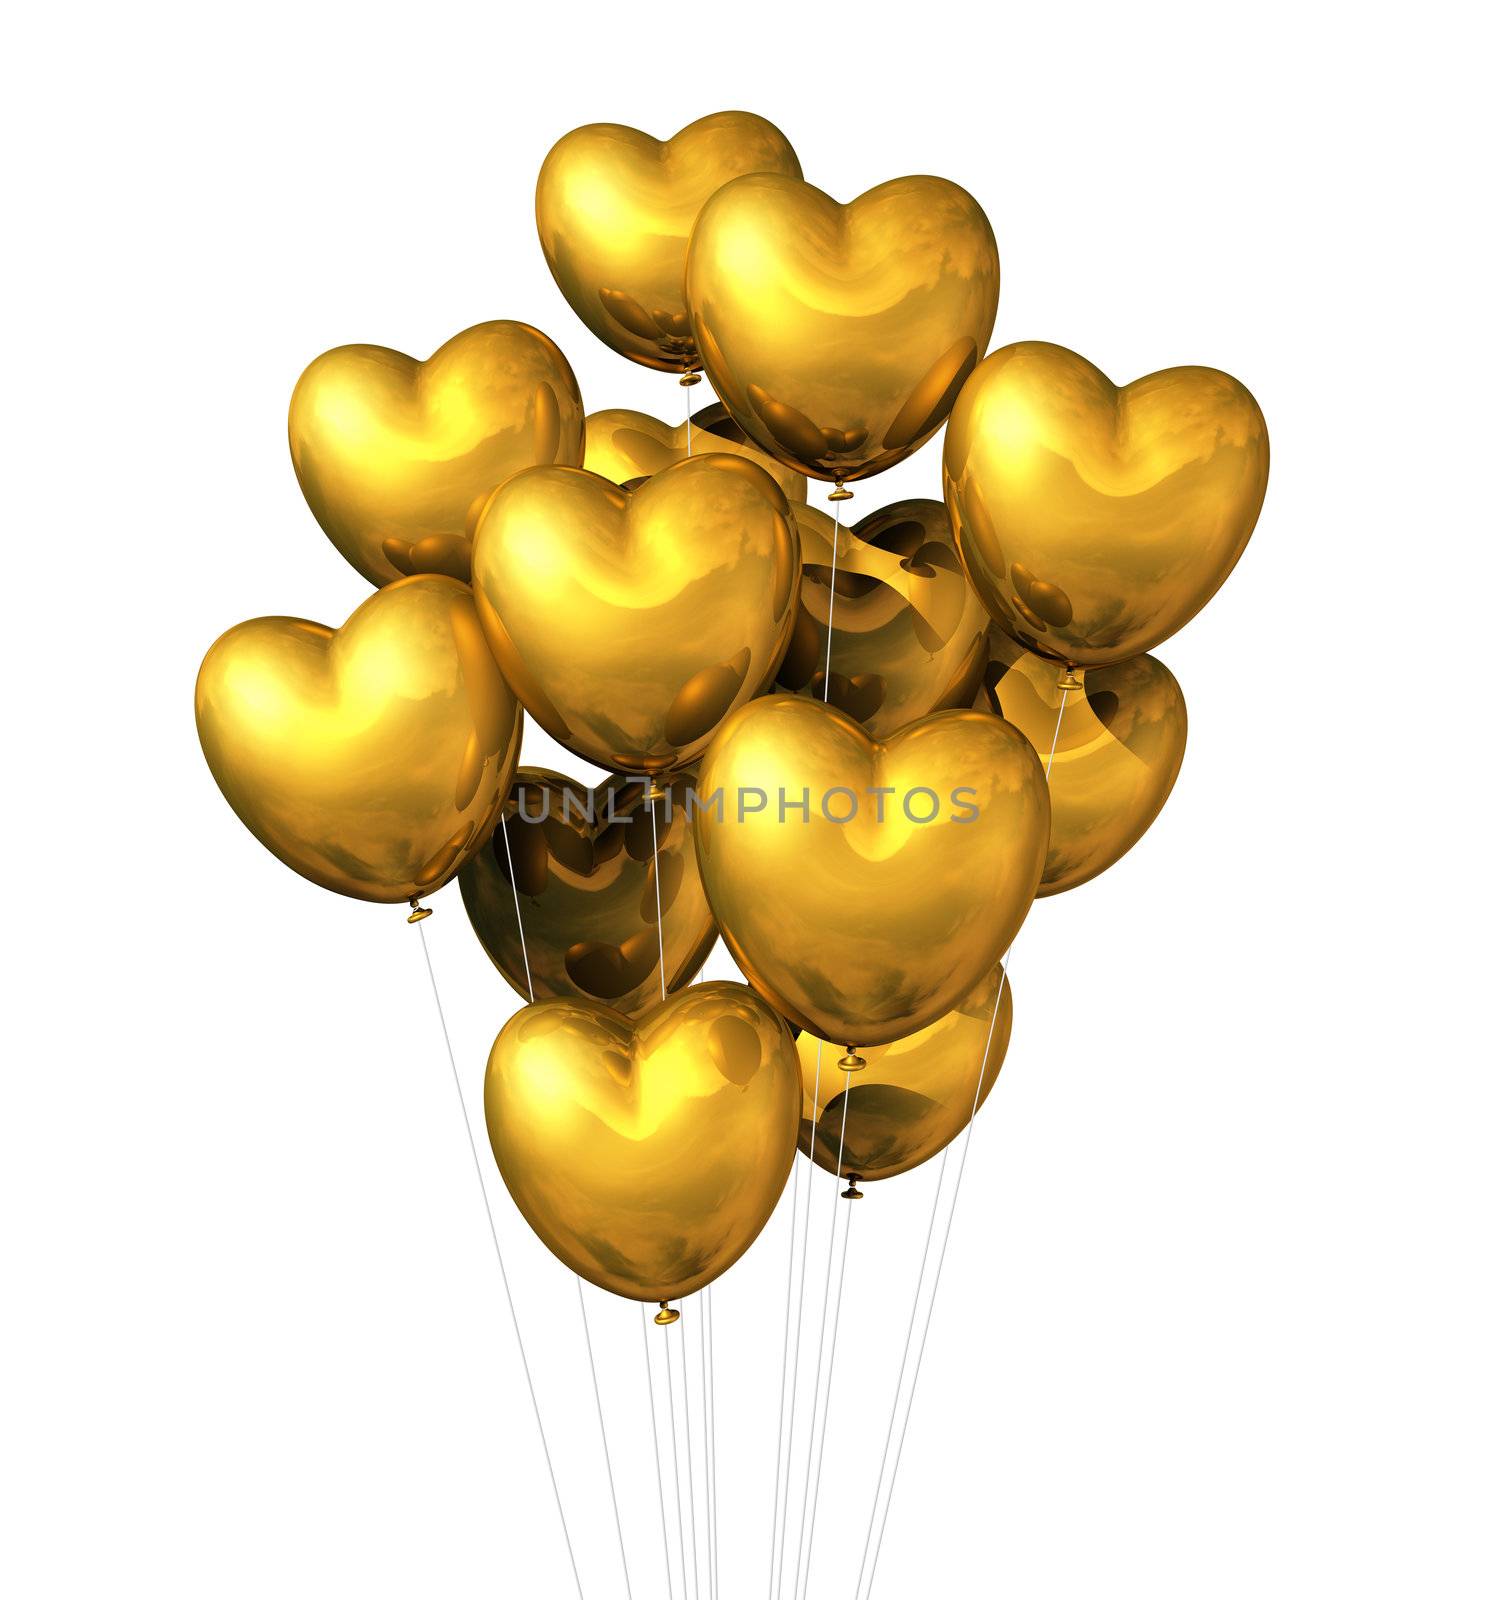 gold heart shaped balloons isolated on white. valentine's day symbol